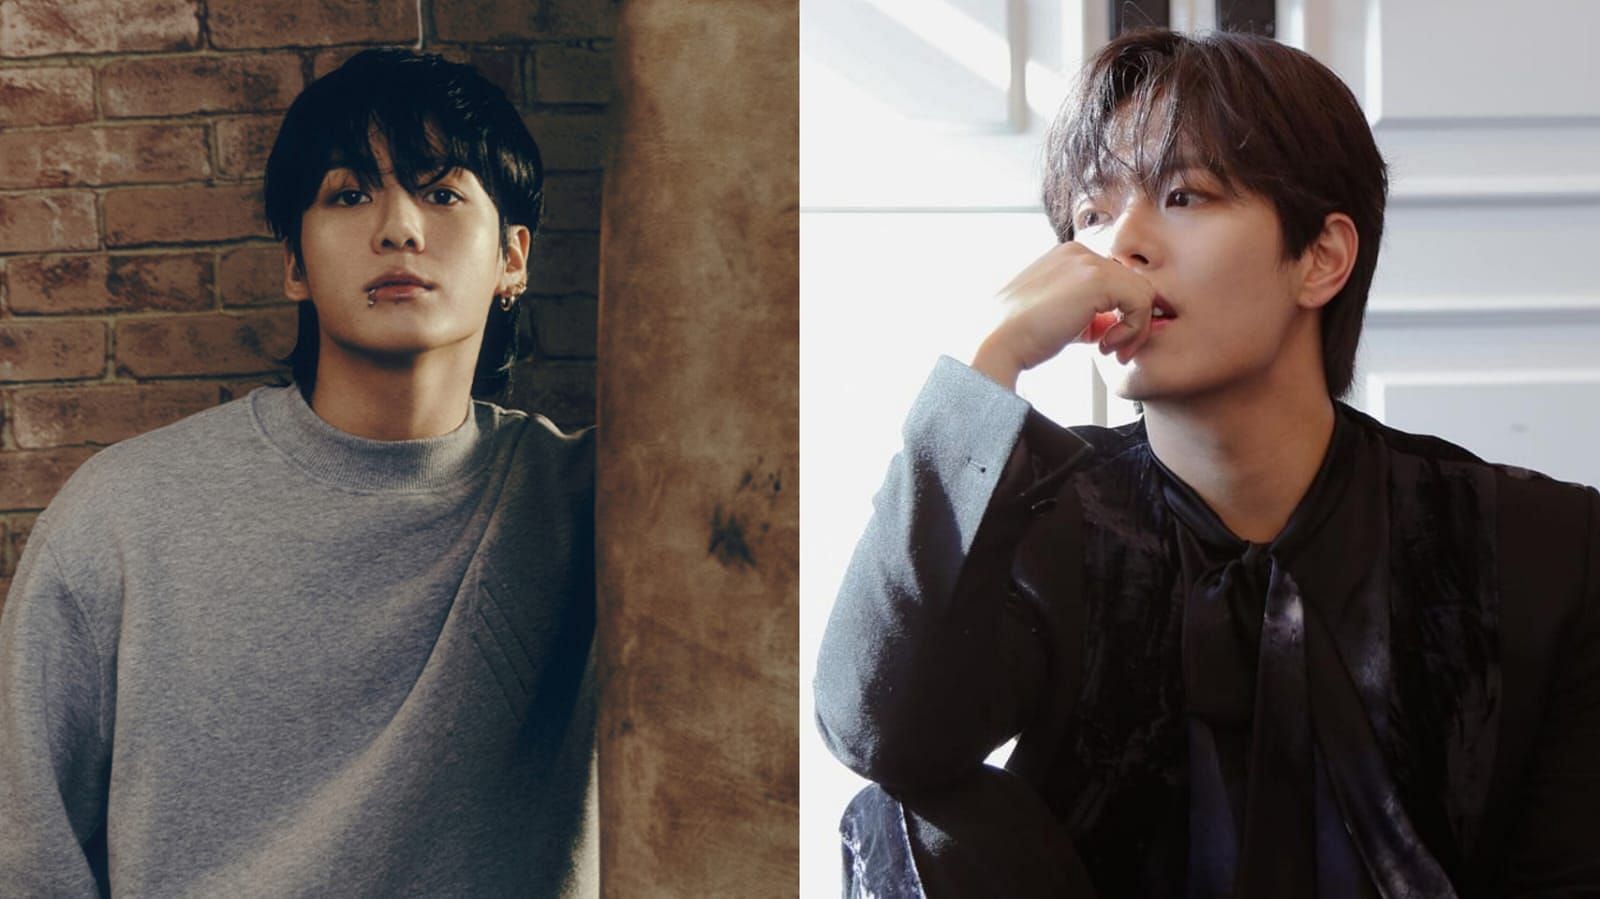 Begins Youth star, Jung Woo-jin reveals his admiration for BTS&rsquo; Jungkook and &lsquo;Standing Next To You&rsquo; (Image via @bts_bighit/X and @wuujinn/Instagram)